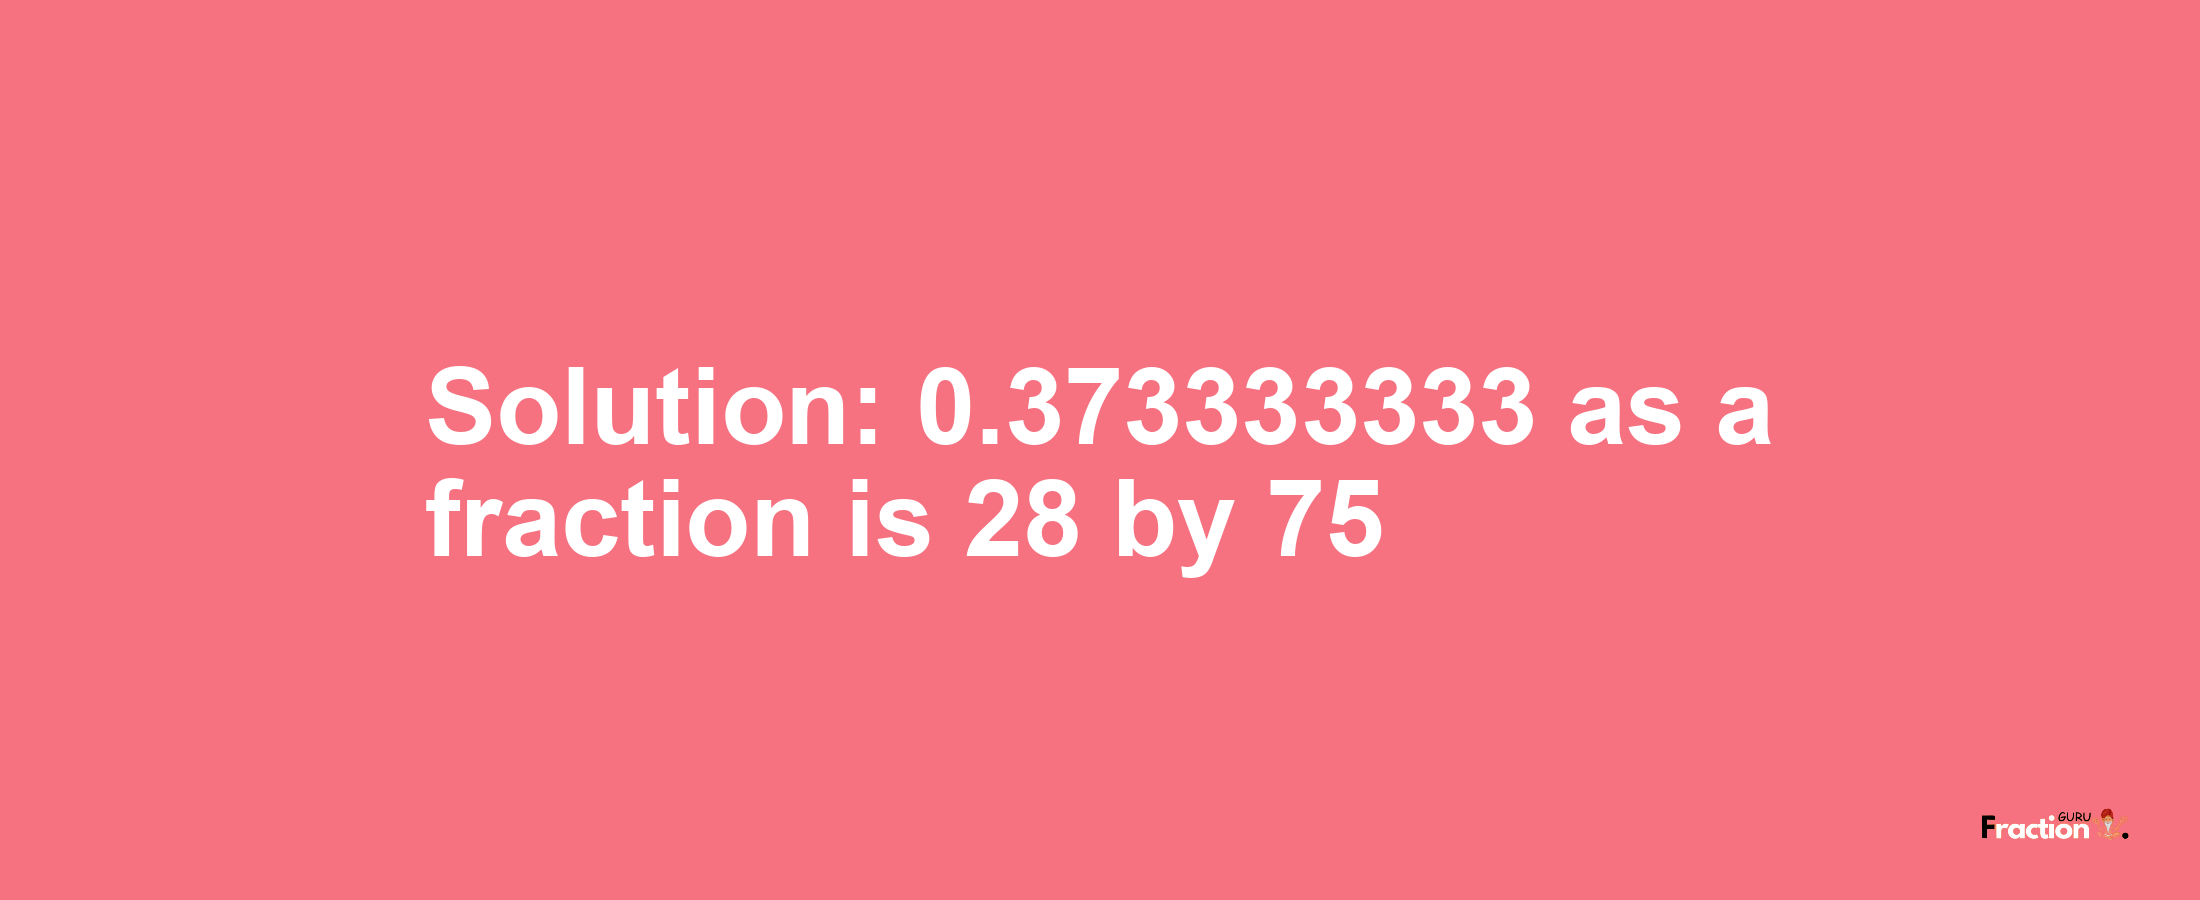 Solution:0.373333333 as a fraction is 28/75